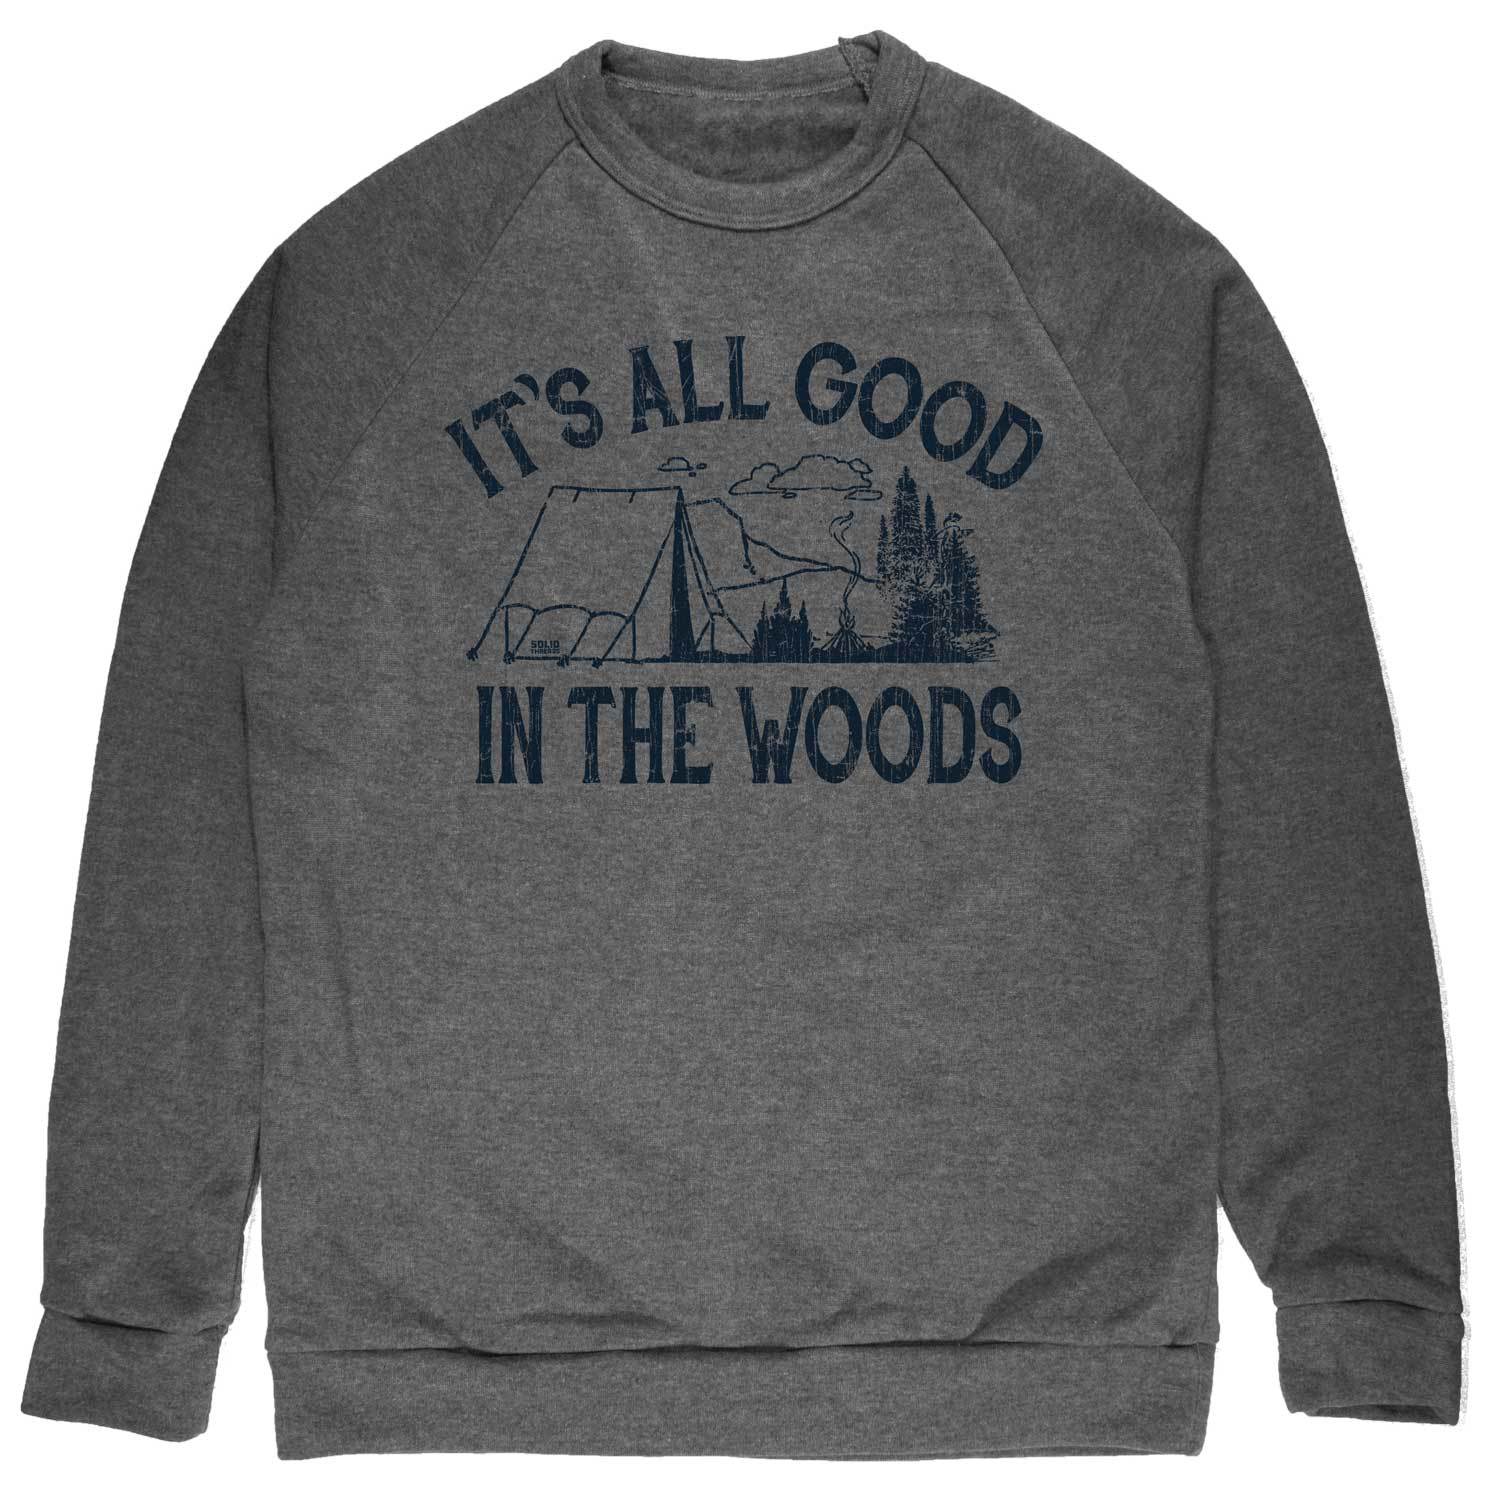 It's All Good In The Woods Vintage Inspired Fleece Crewneck Sweatshirt with cool camping graphic | Solid Threads